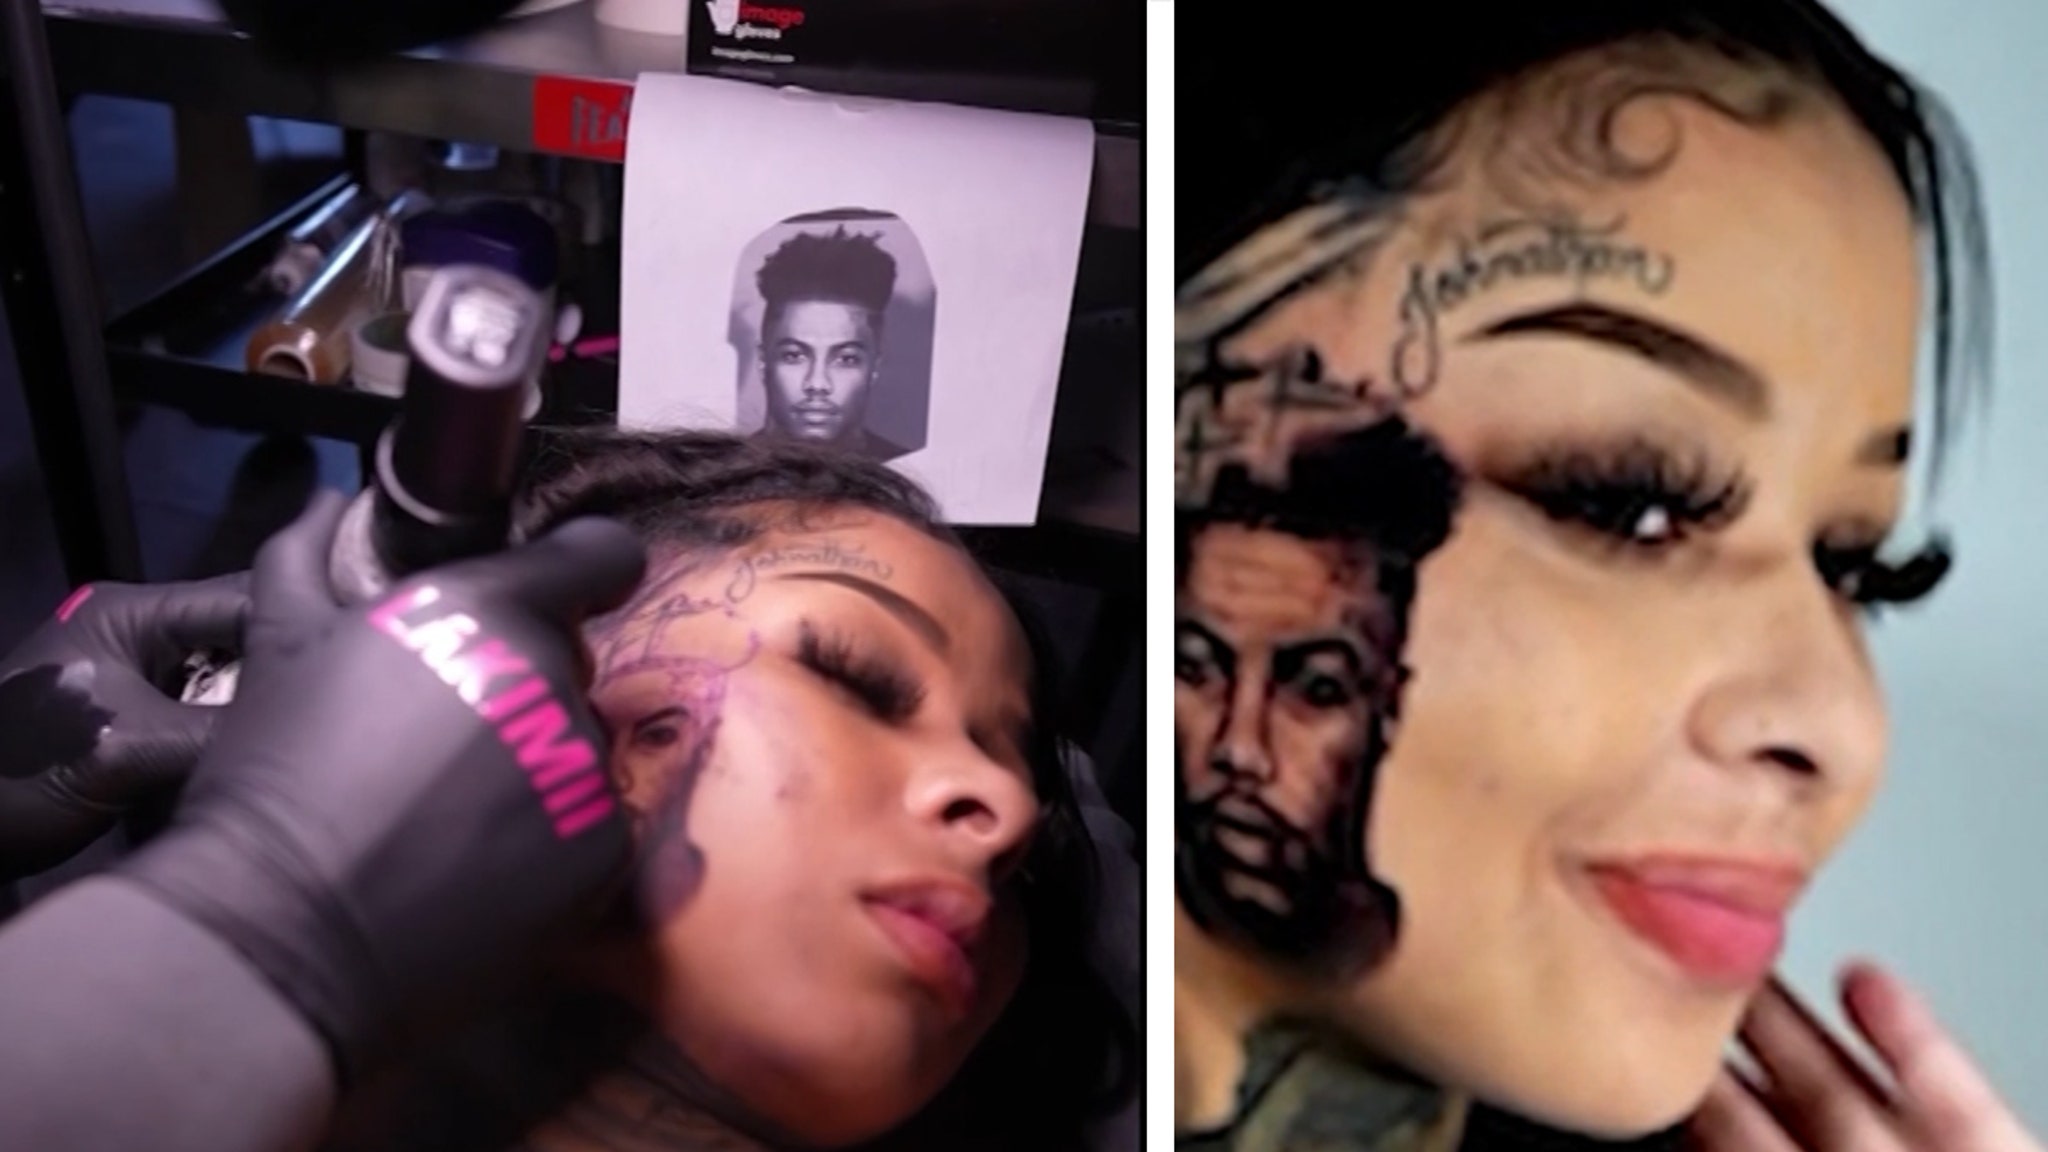 Chrisean Rock’s New Blueface Ink 100% Real, Says Tattoo Shop